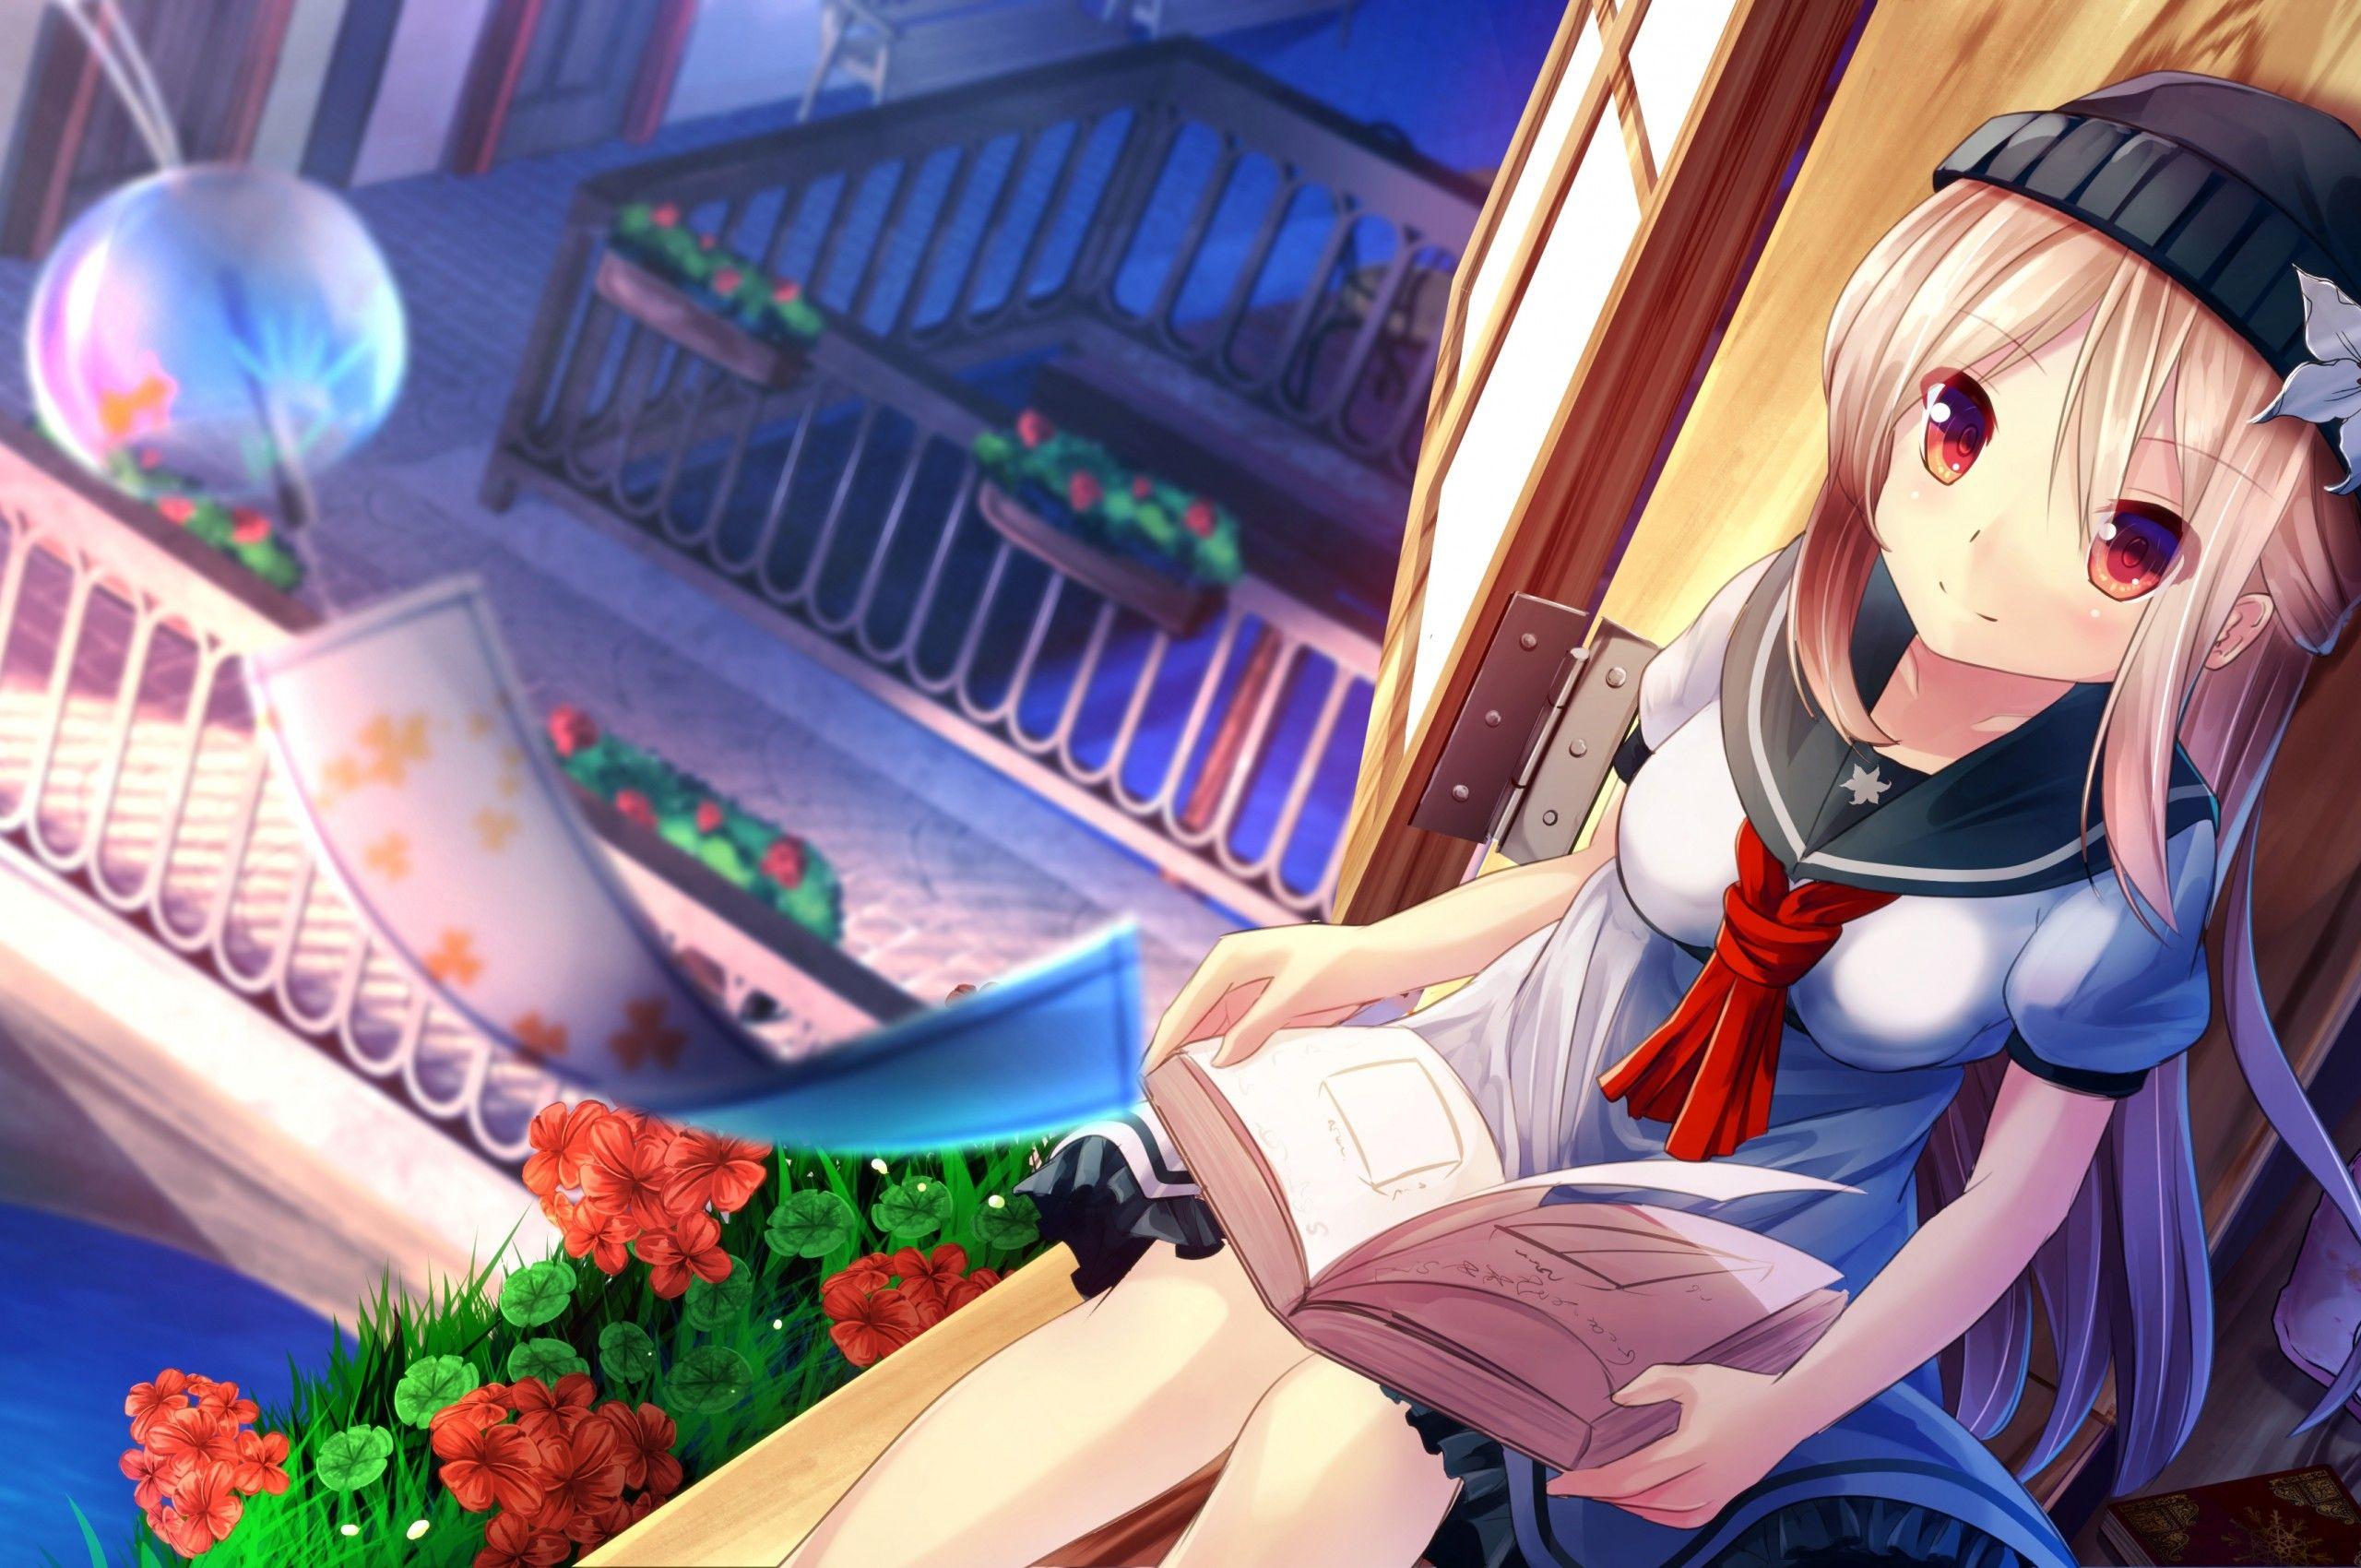 Download 2560x1700 Anime Girl, Sitting, Reading A Book, School